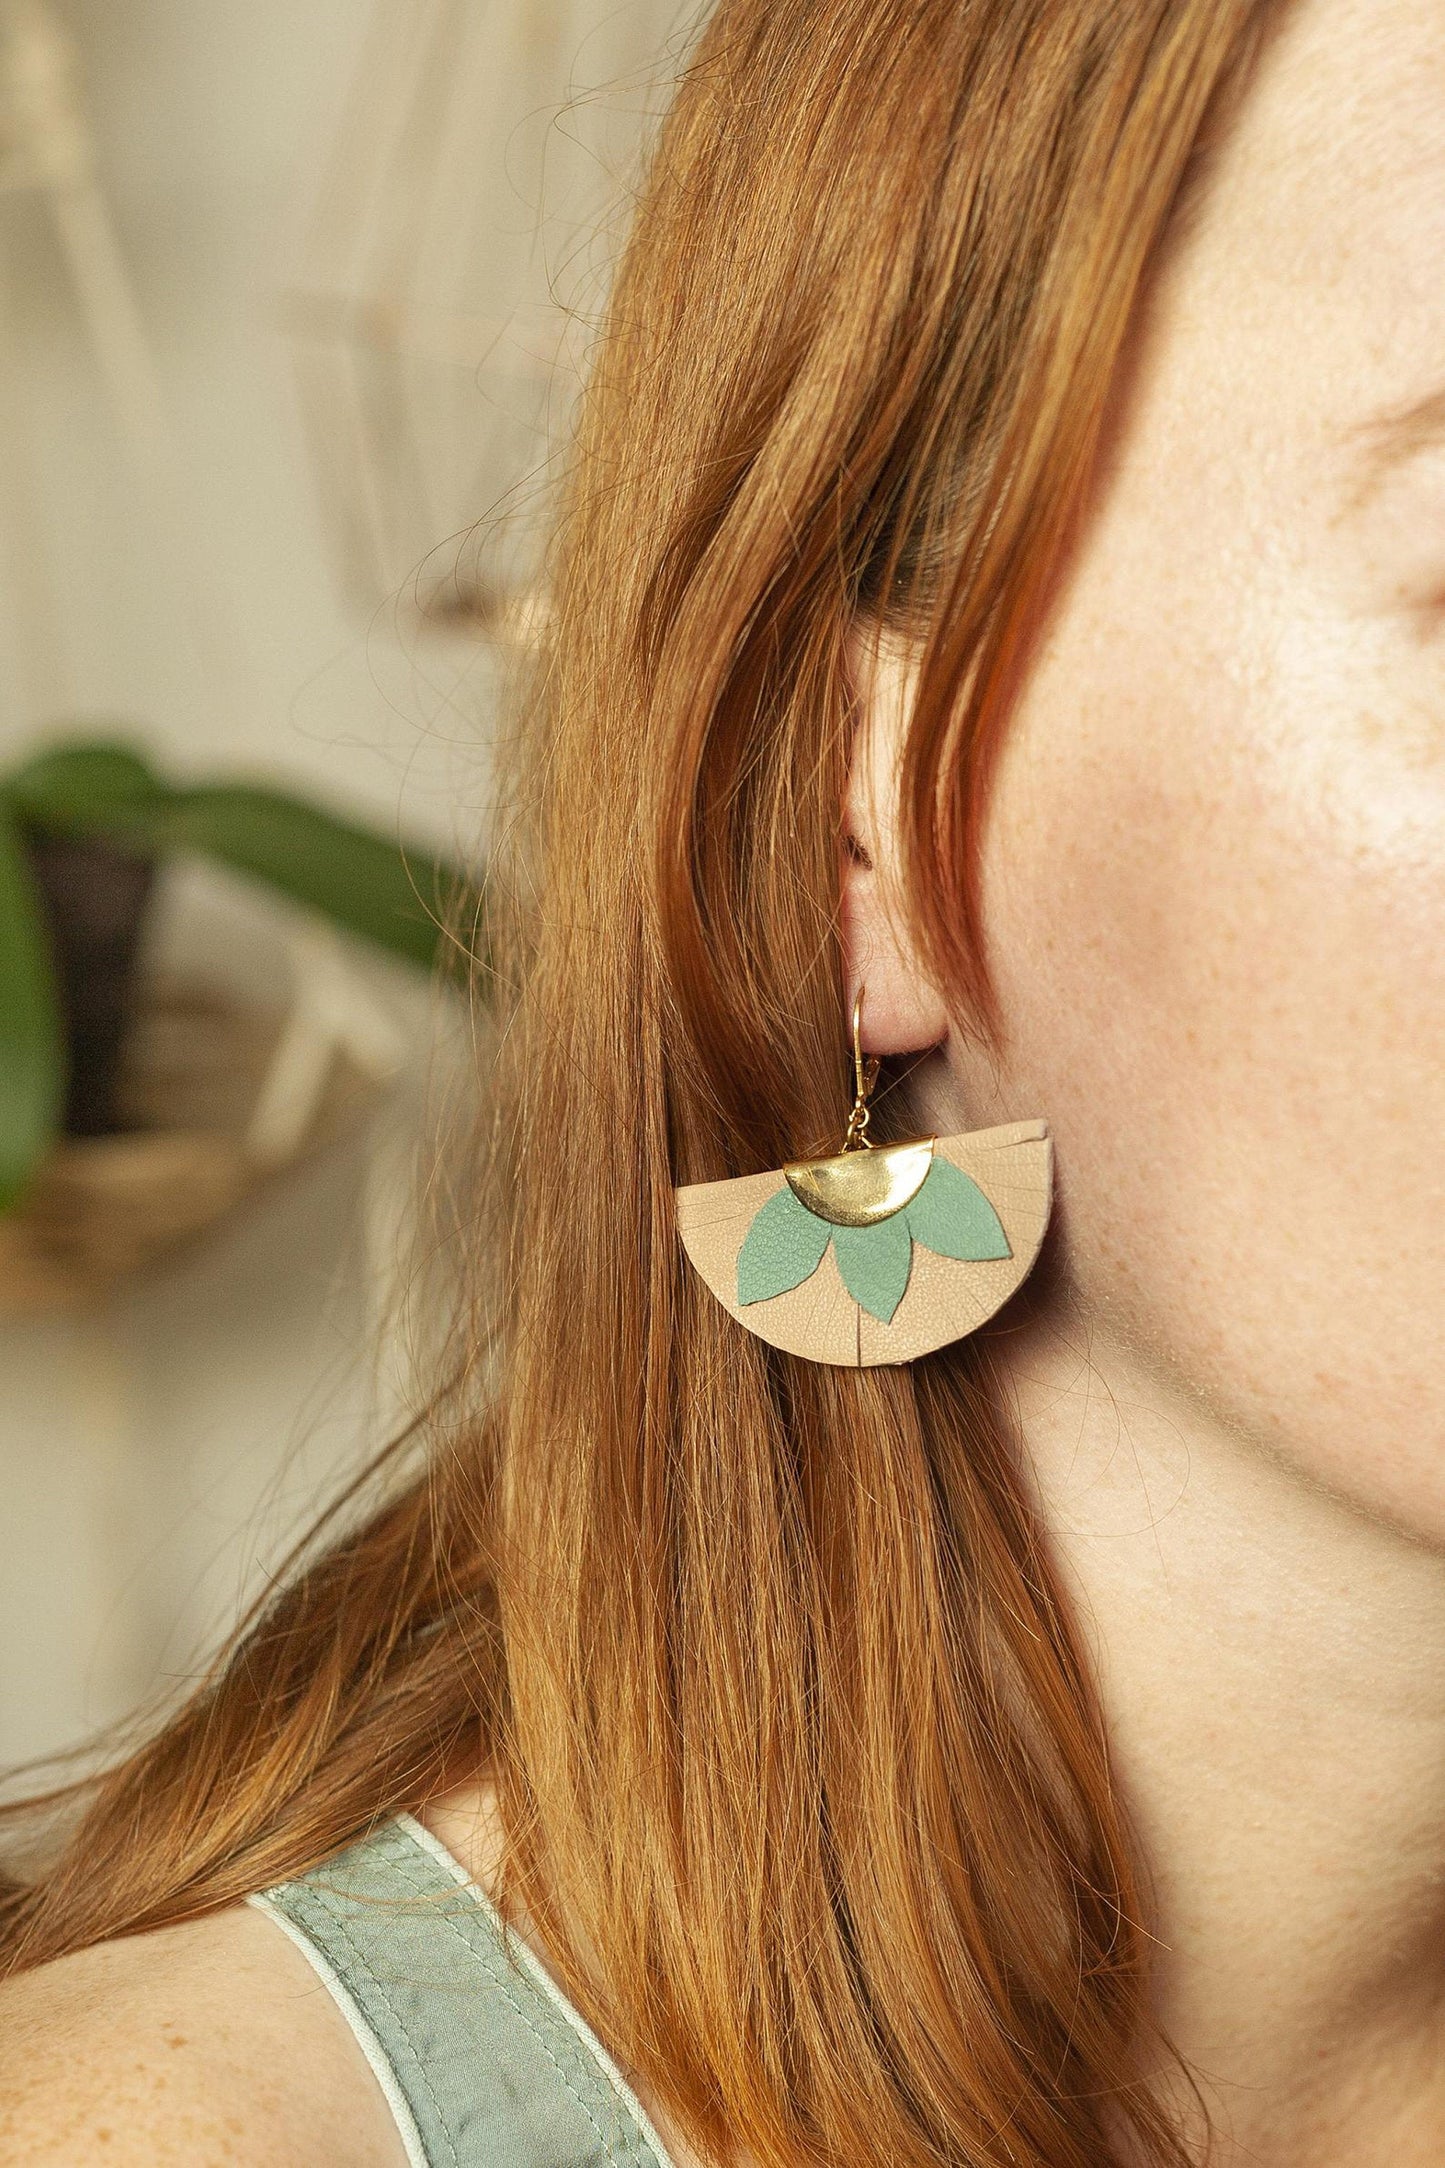 Pink and green leather half-circle earrings